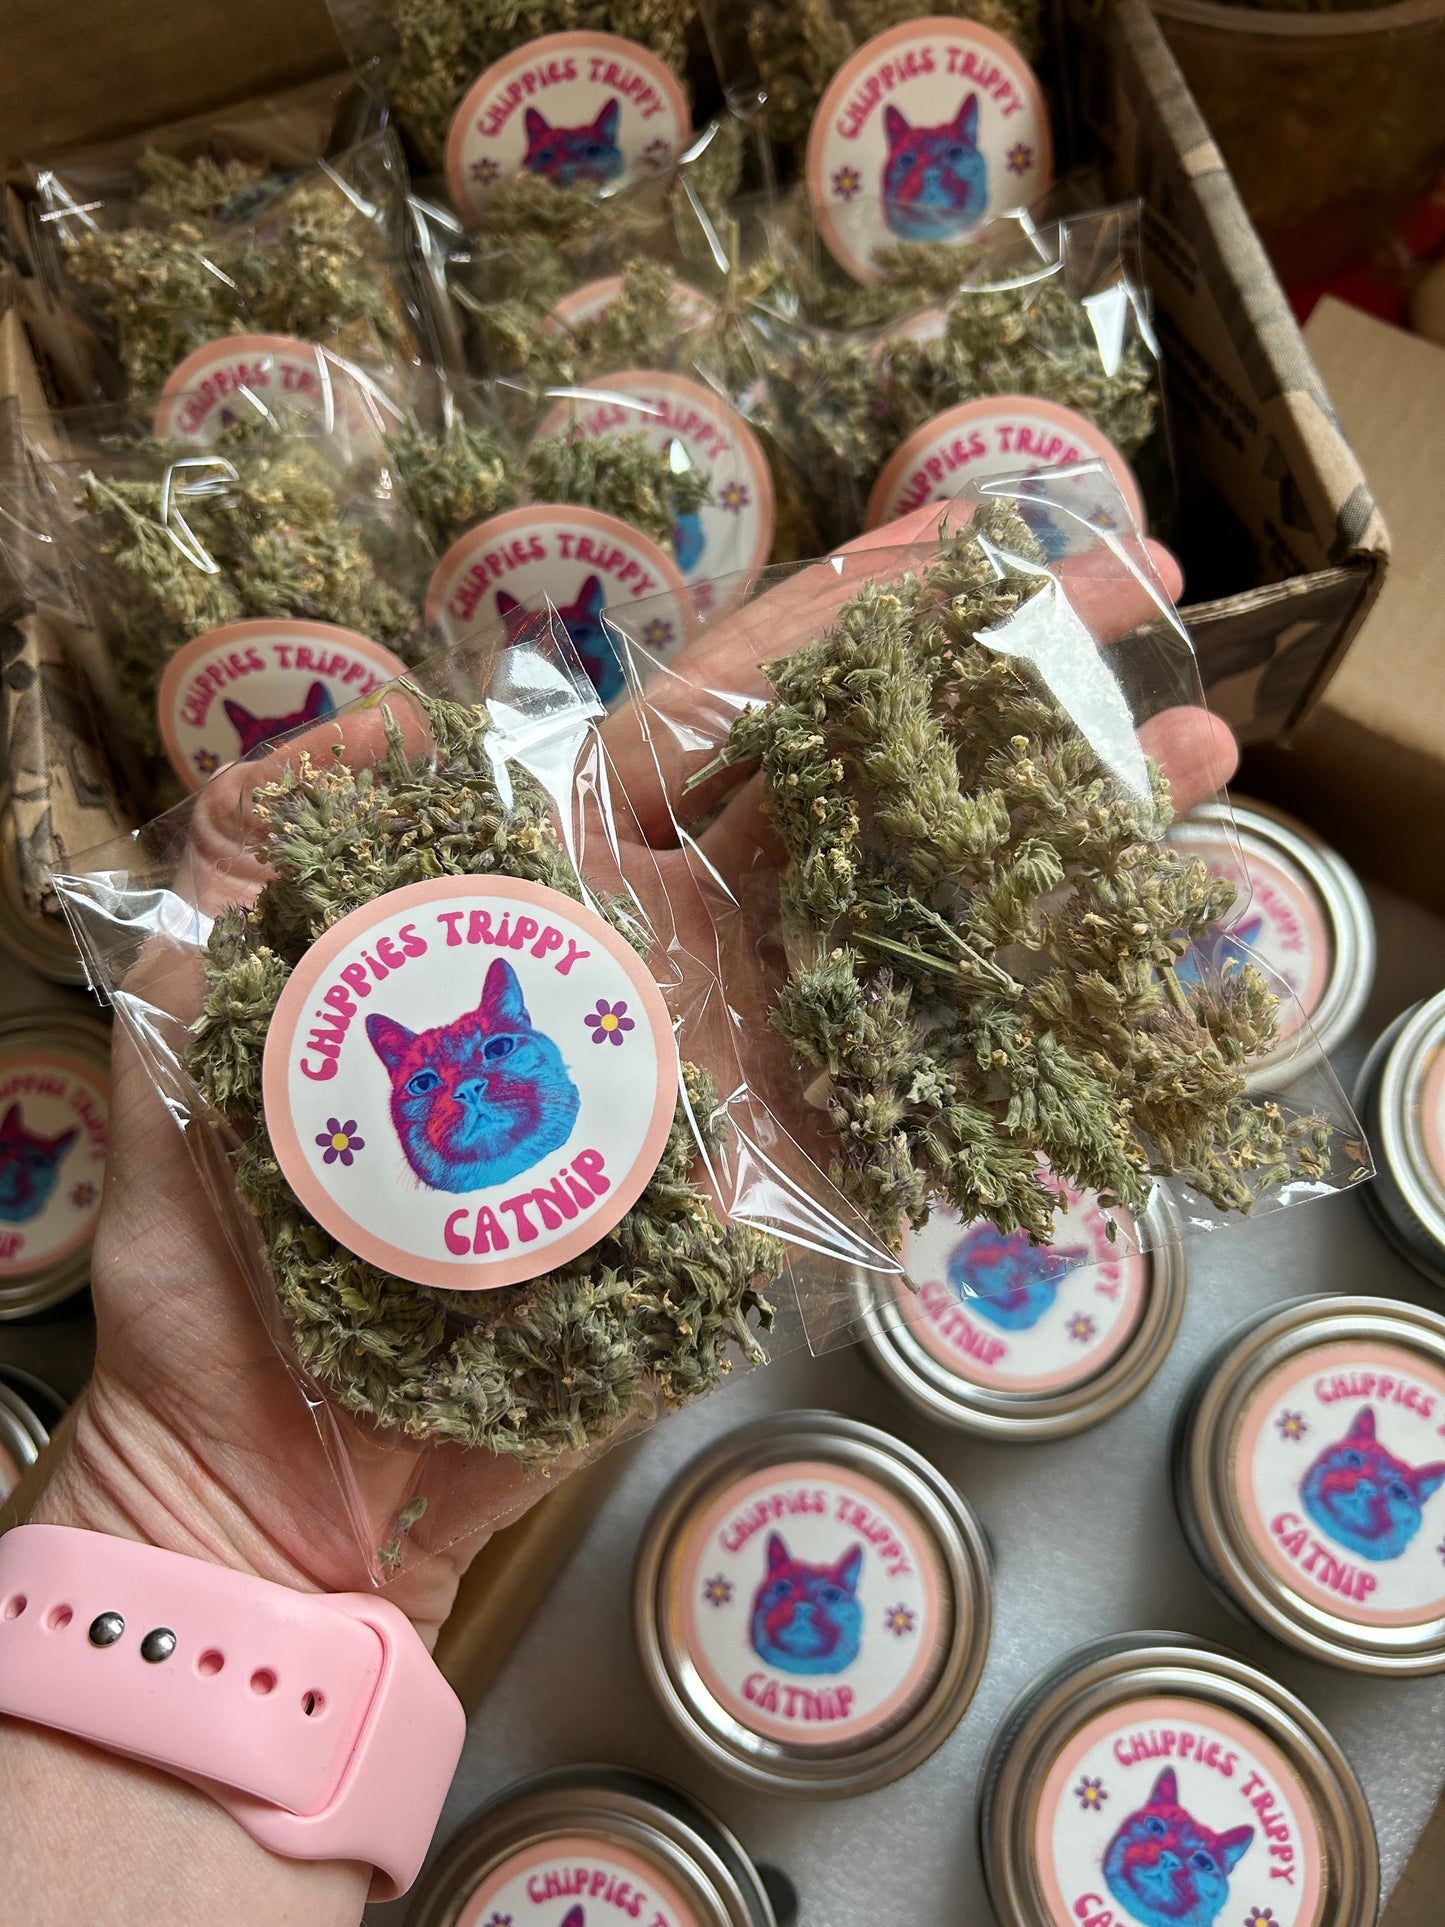 Limited edition bags of full catnip buds